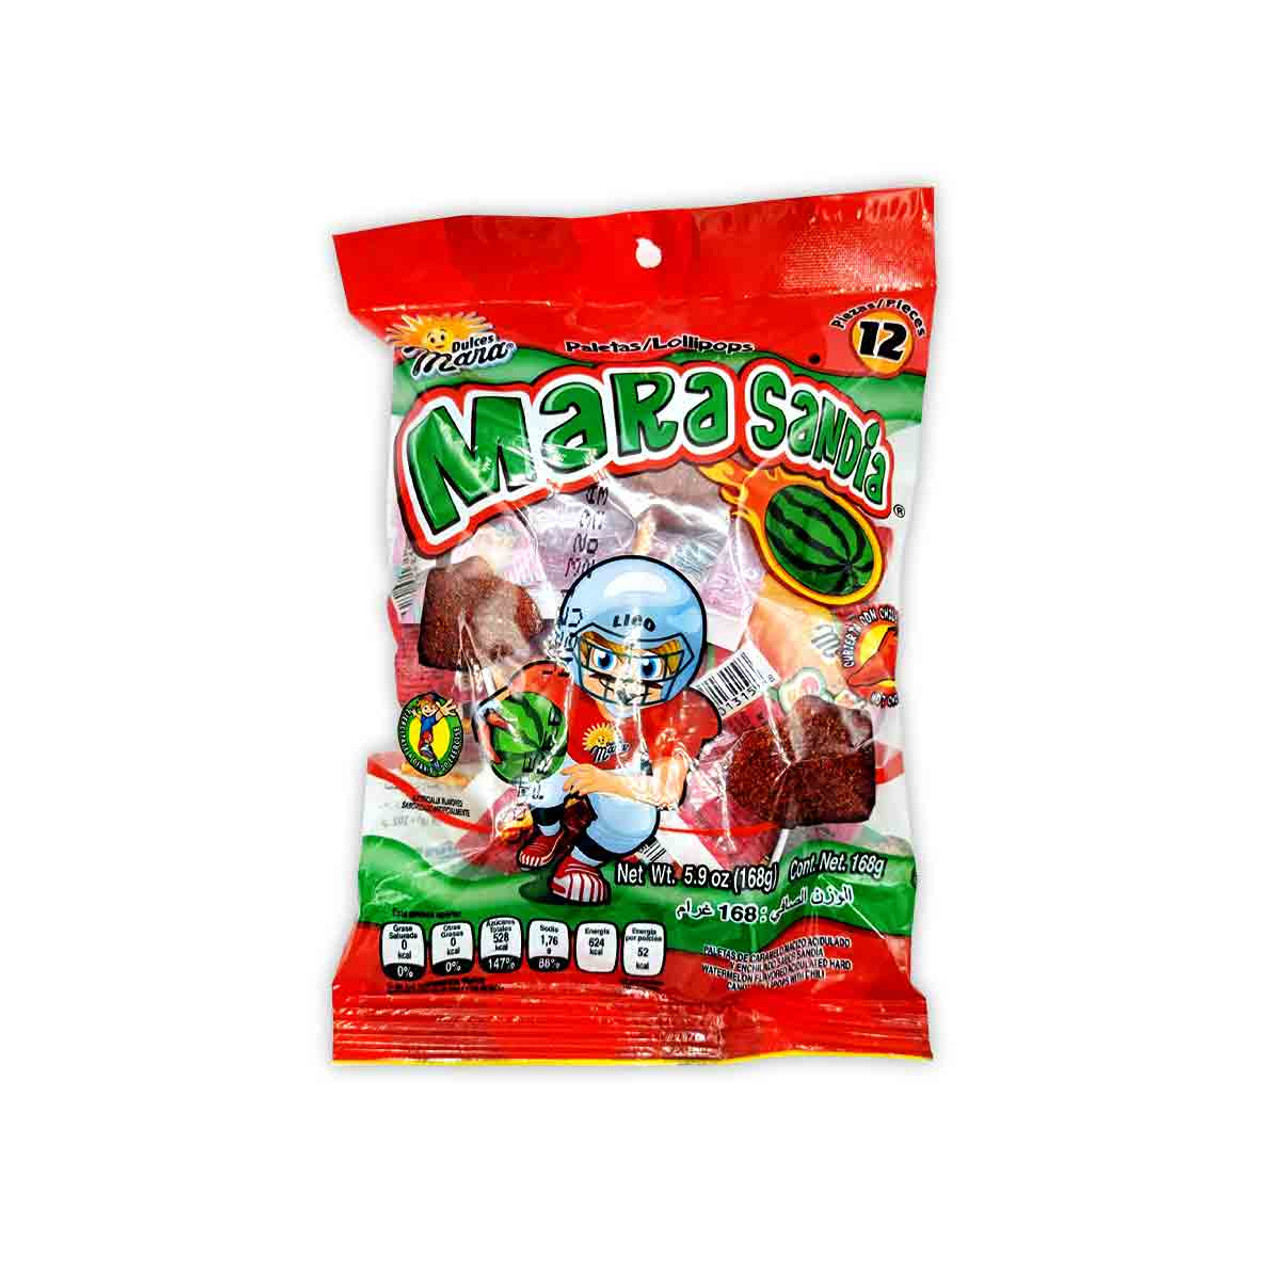 Twelve delicious individually wrapped hard candy lollipops flavored with the fruity essence of watermelons and cover with a thin layer of spicy chili powder.